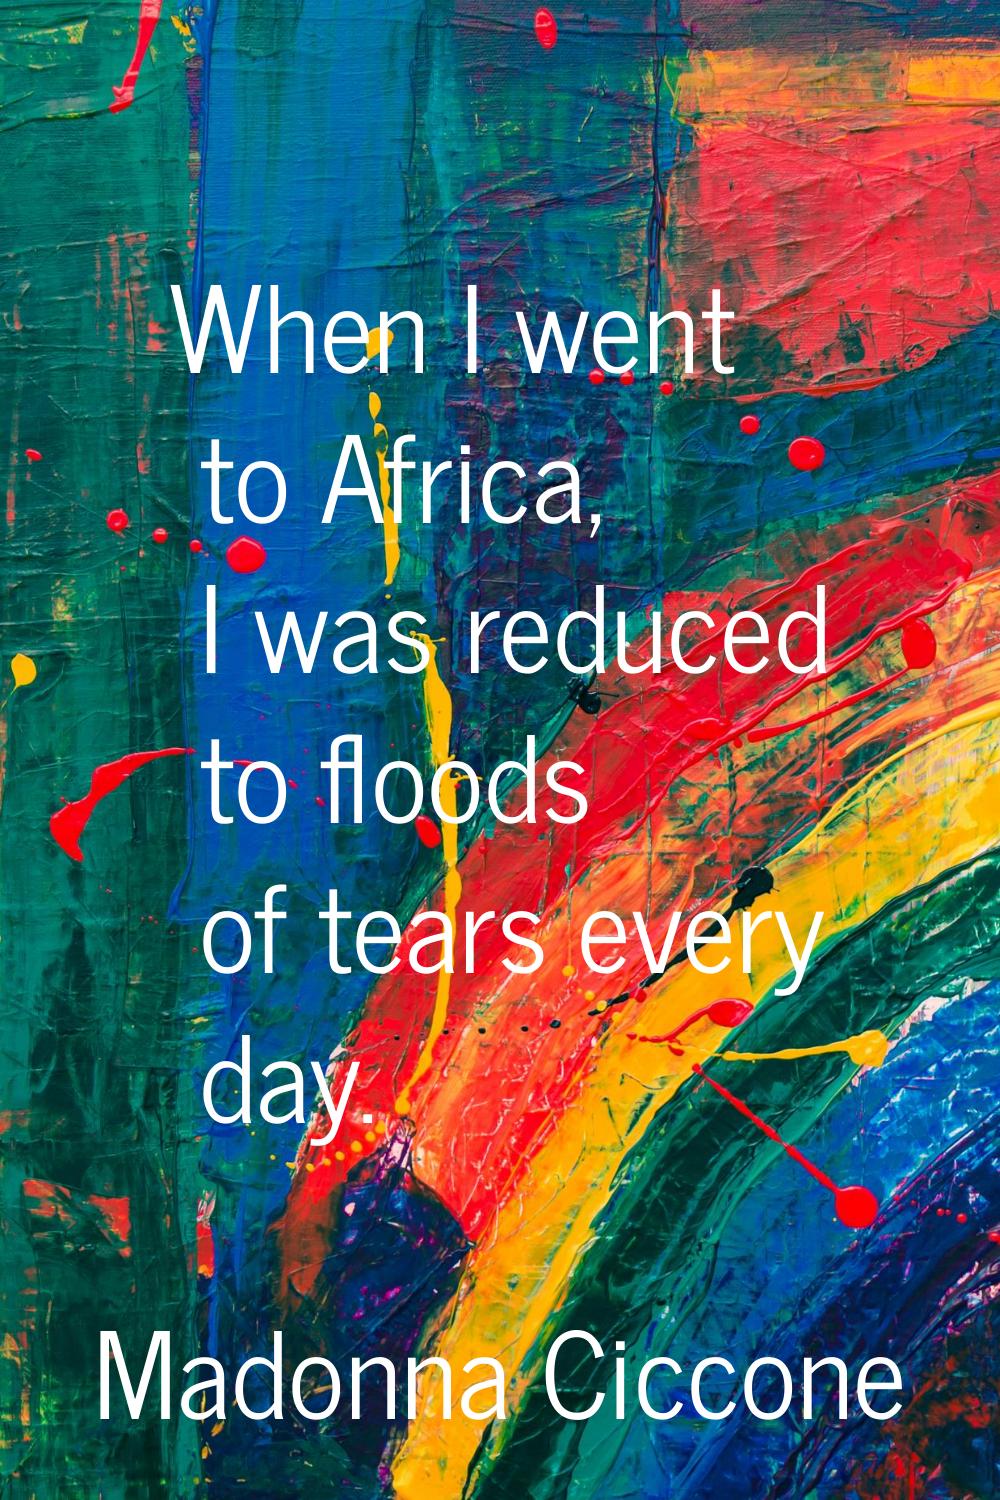 When I went to Africa, I was reduced to floods of tears every day.